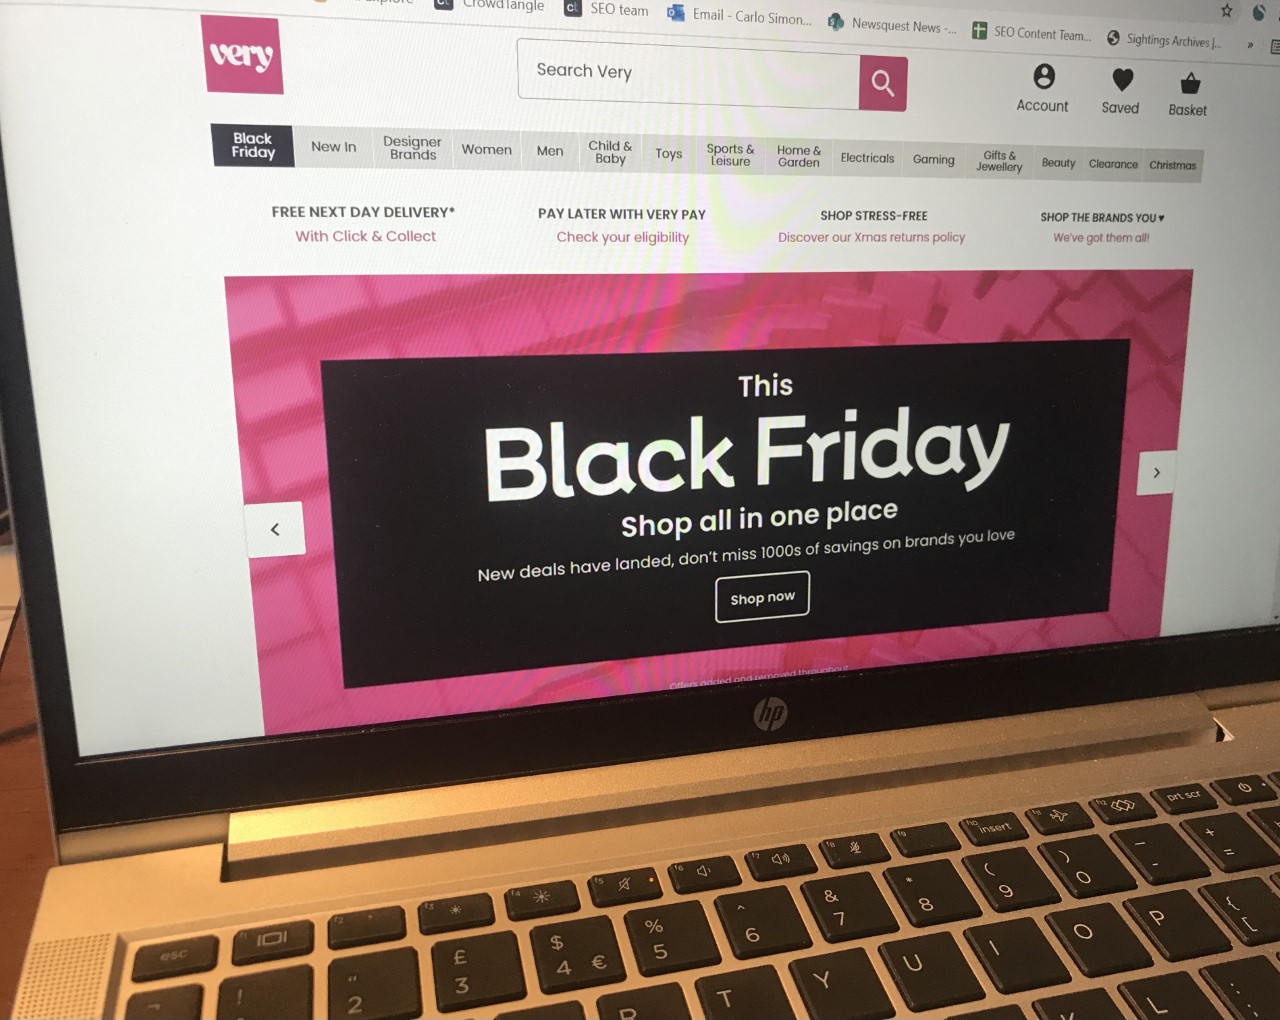 Very offers Black Friday 2021 discounts in fashion and beauty